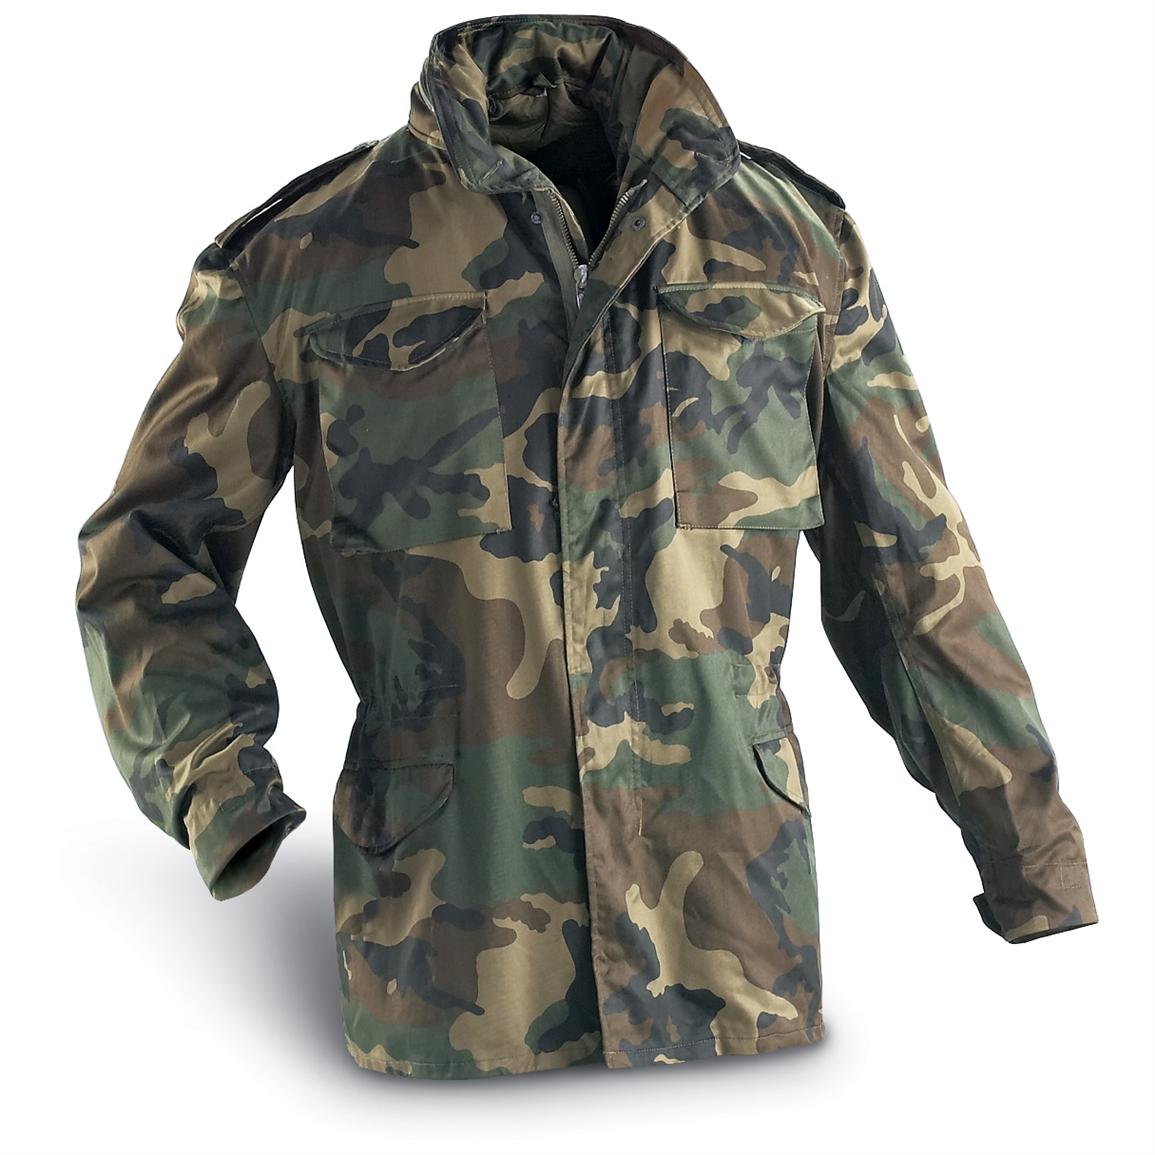 New Croatian M65 Jacket, Camo - 101188, at Sportsman's Guide